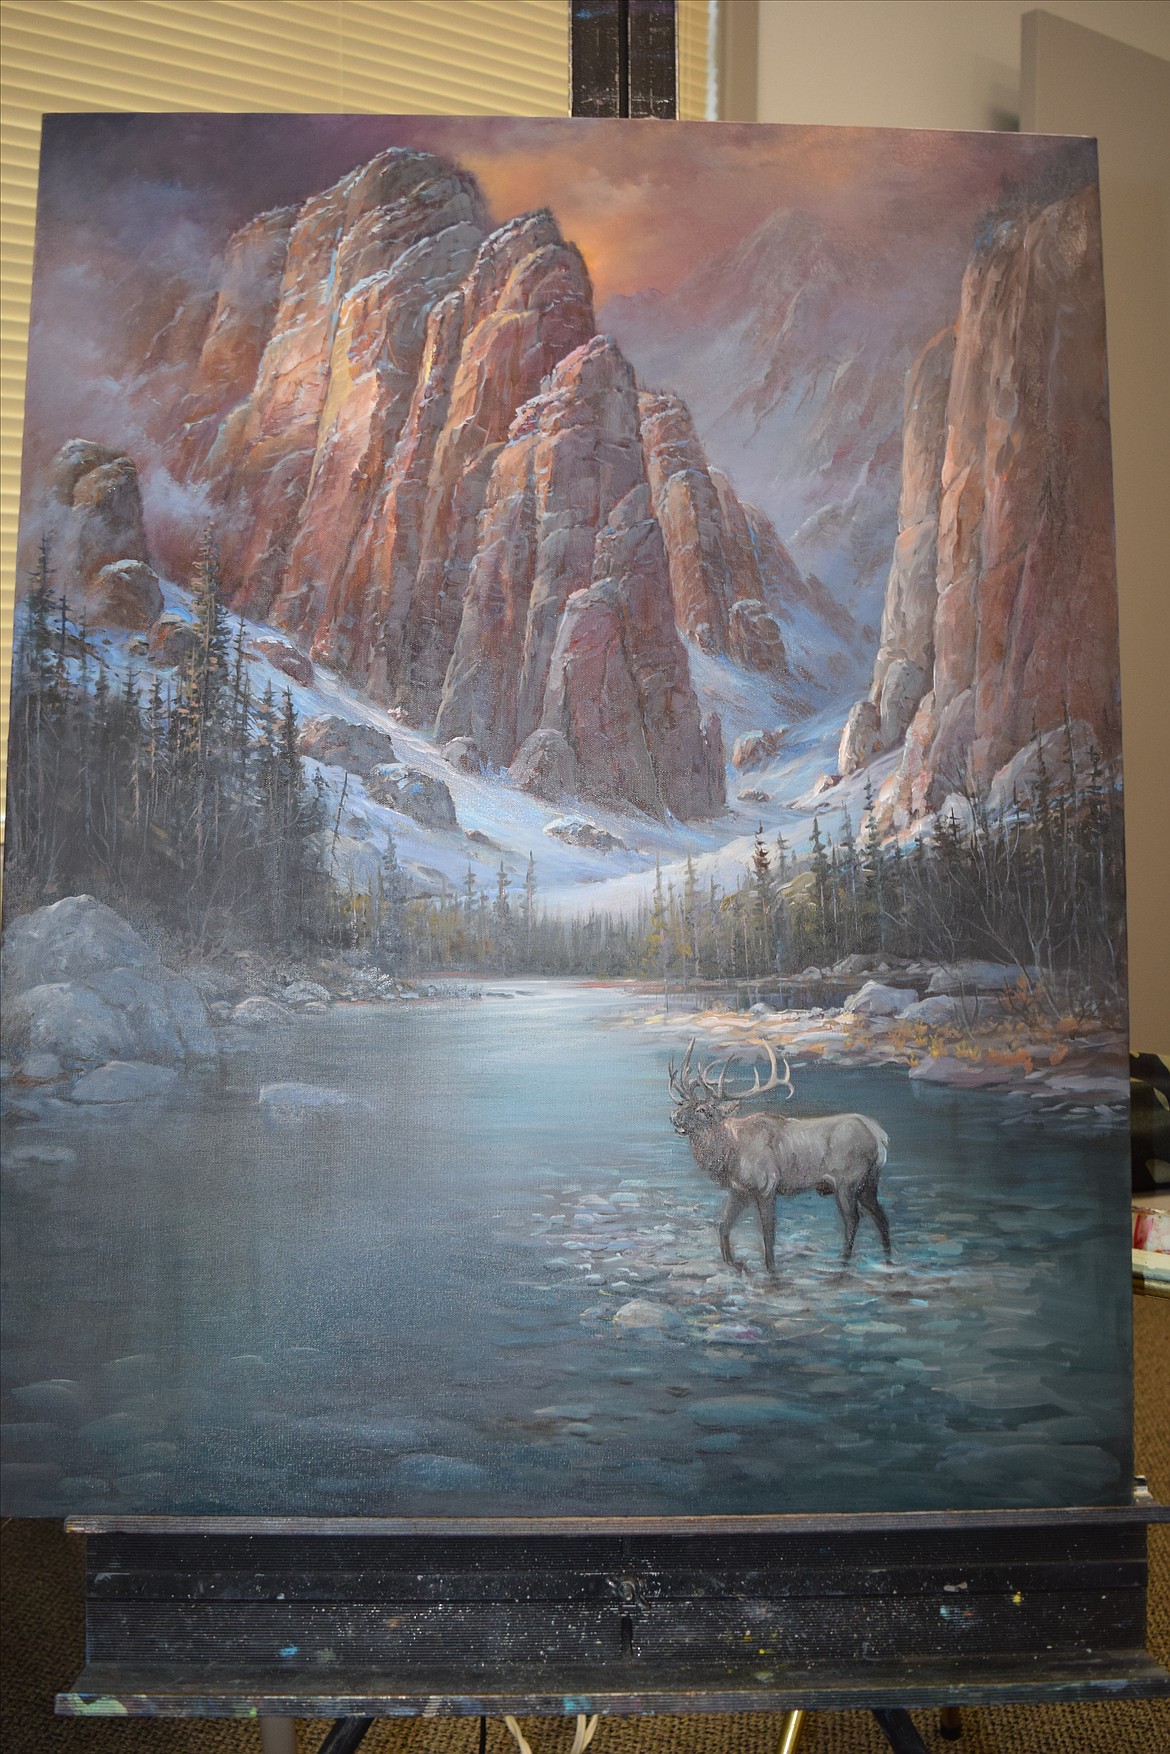 Frank Gray triumphed over a blank canvas to create this oil painting, "High Mountain Monarch."